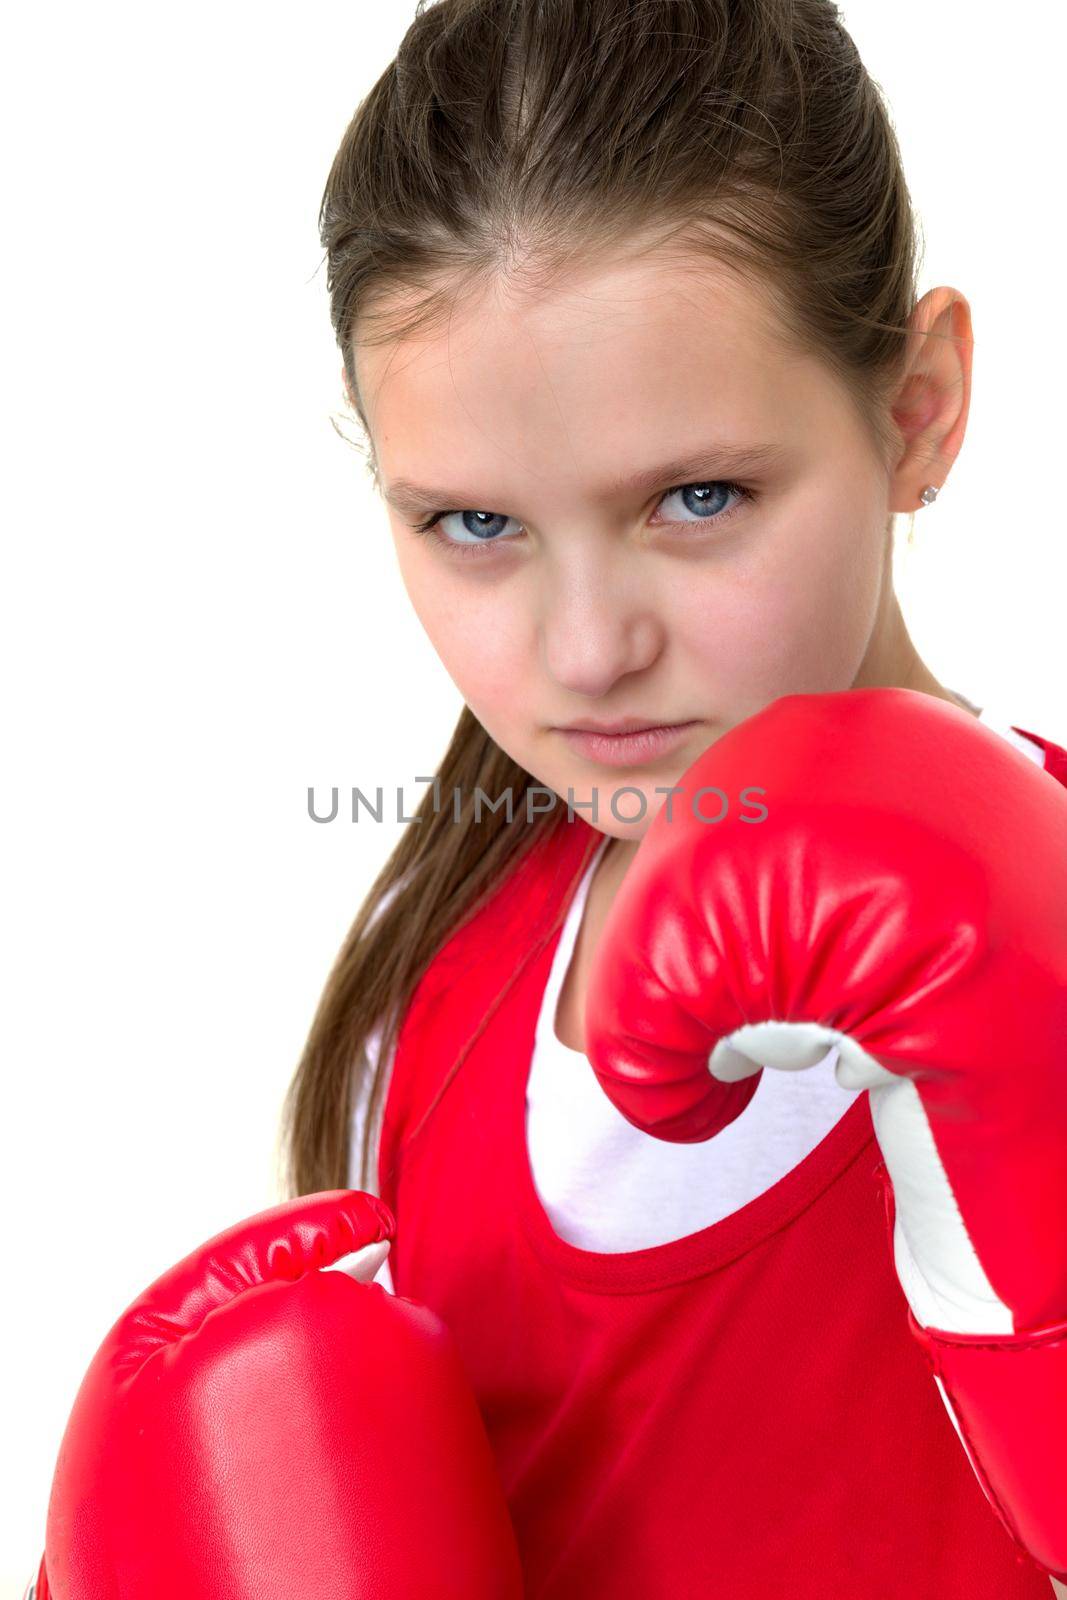 Smiling girl training in boxing gloves. Portrait of teenage girl boxer dressed sportswear ready to fight. Child posing on isolated white background. Healthy lifestyle, sport and fitness concept